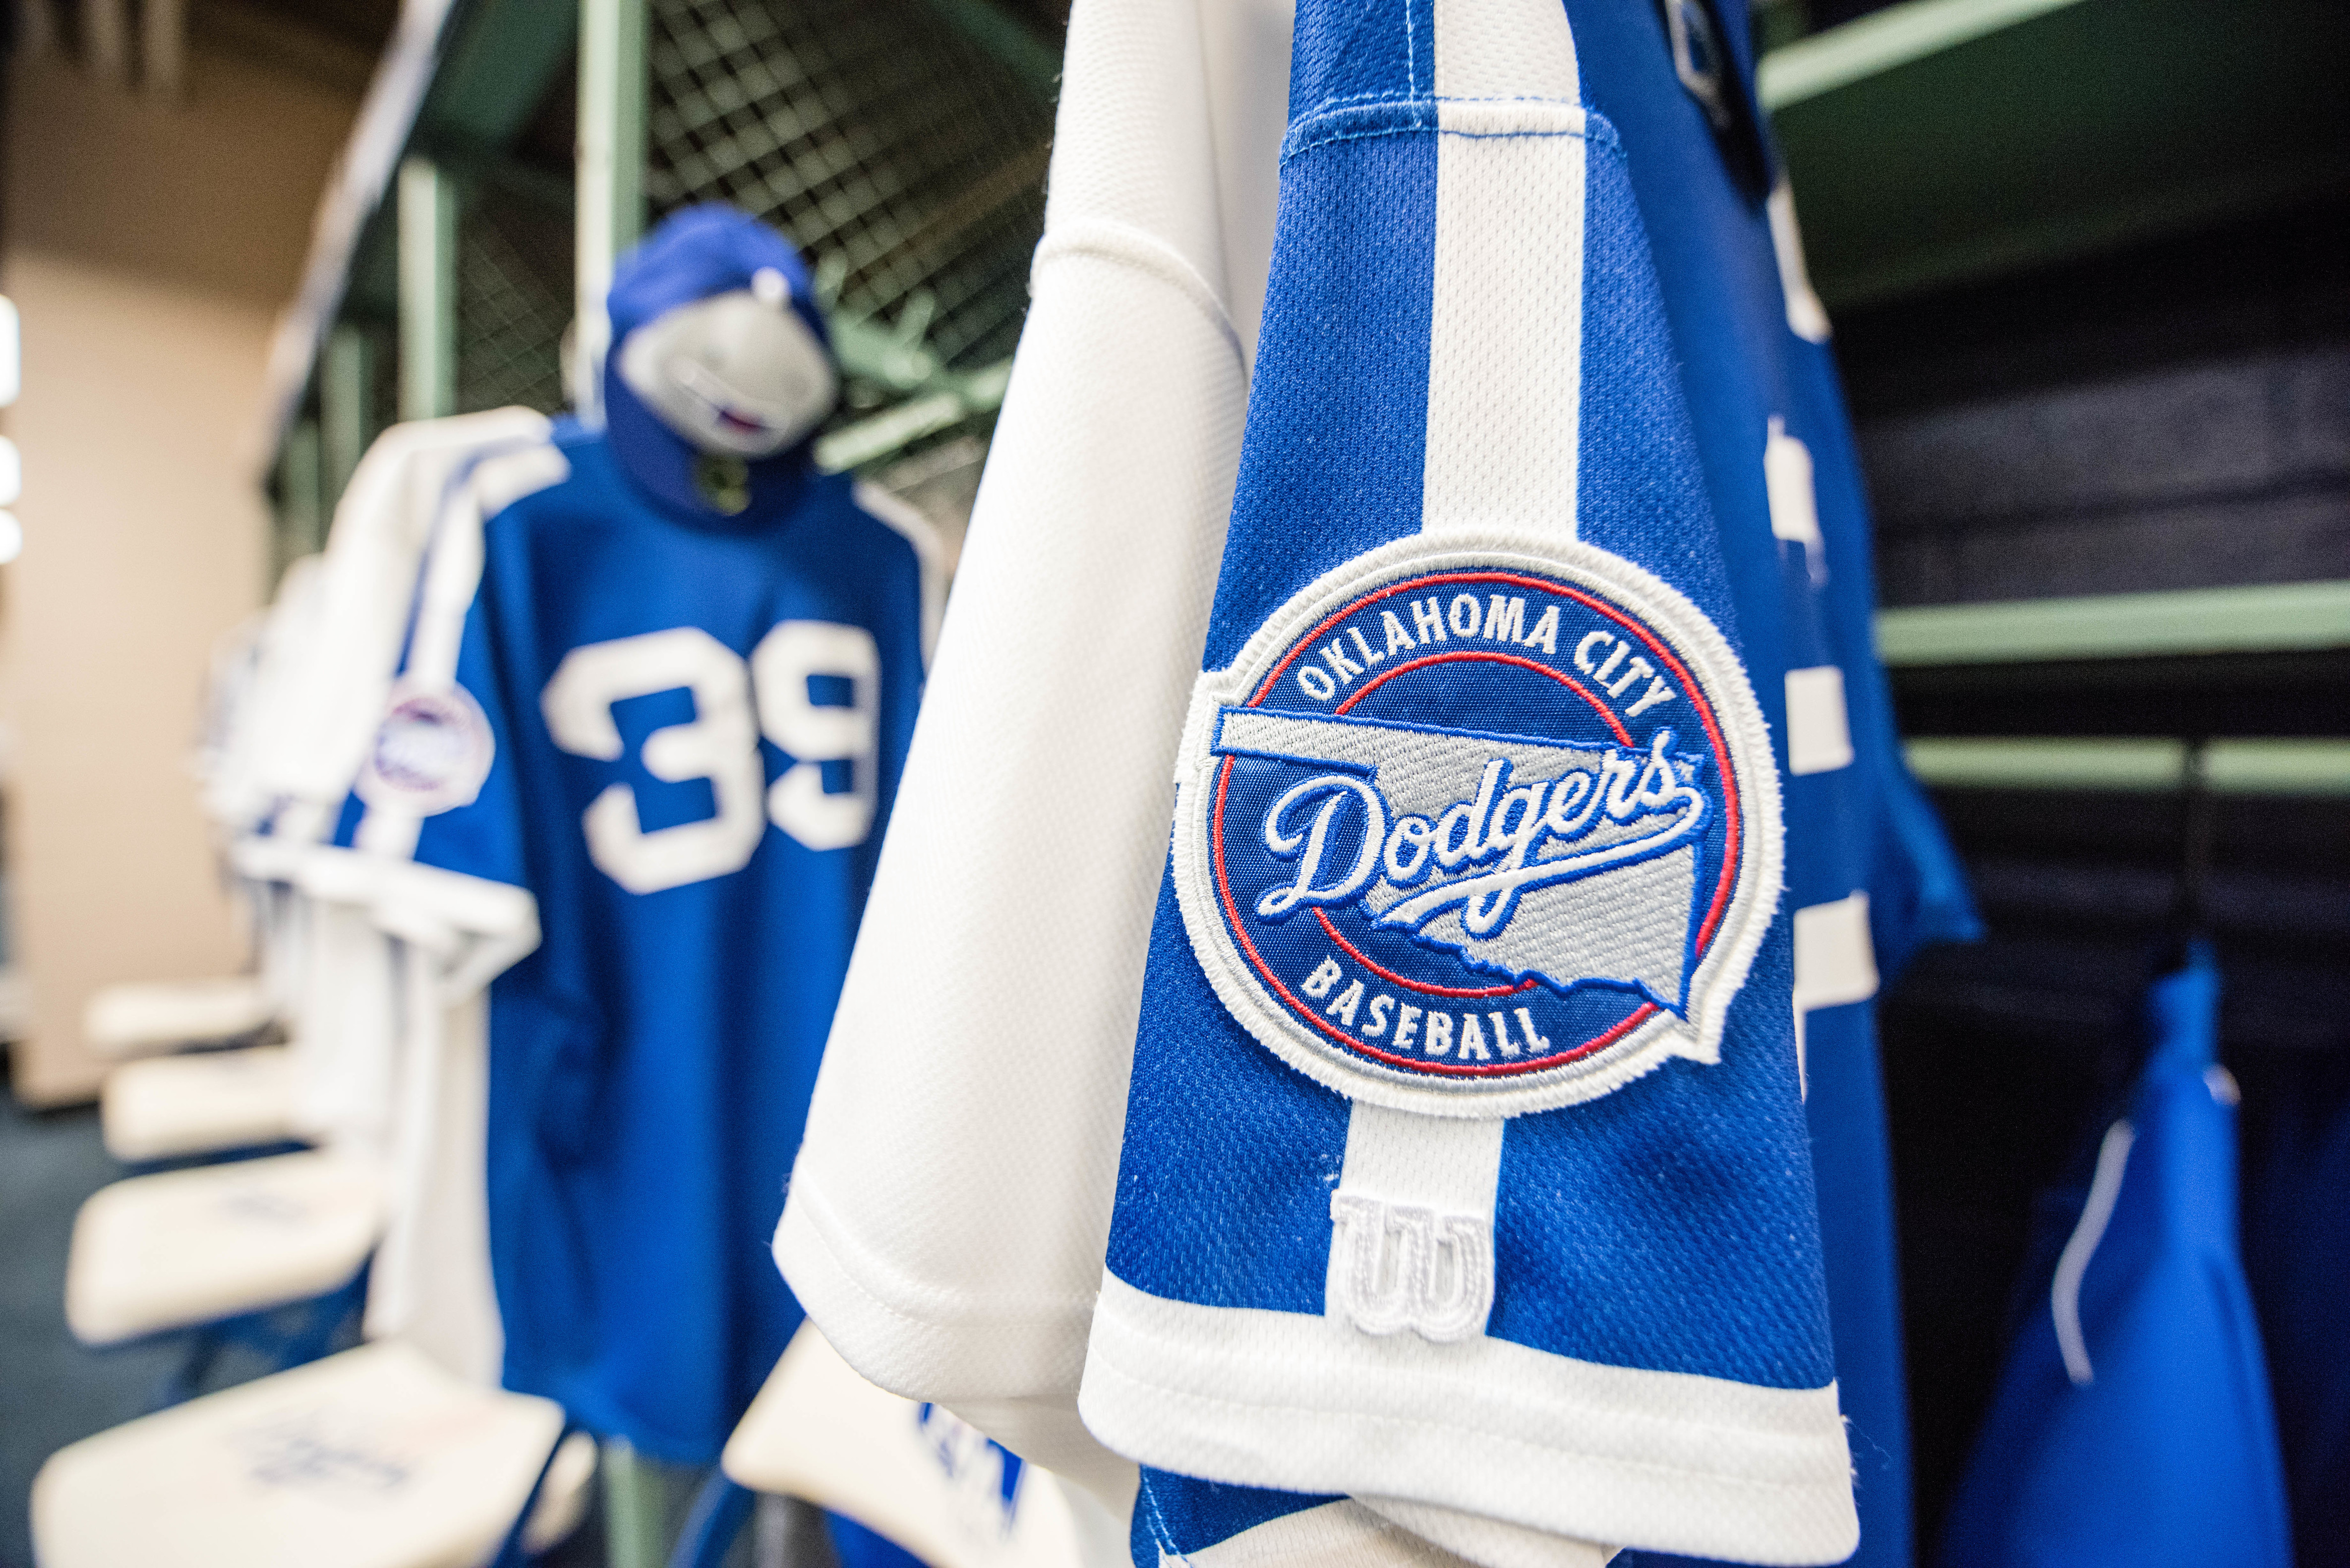 Oklahoma City Dodgers: Unveiling of Dodgers nickname is